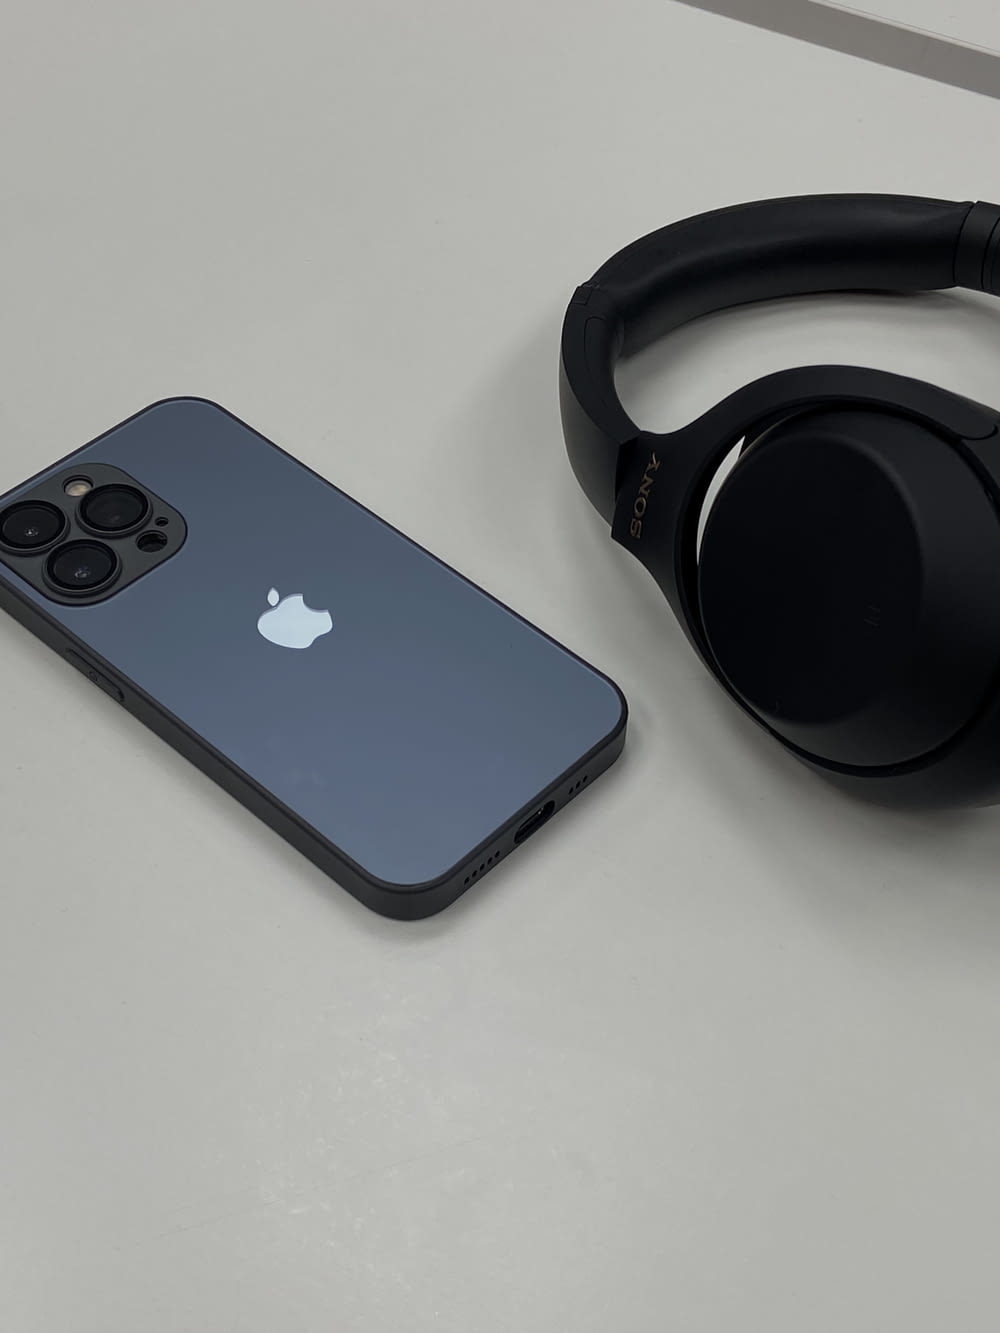 a pair of headphones sitting next to an iphone